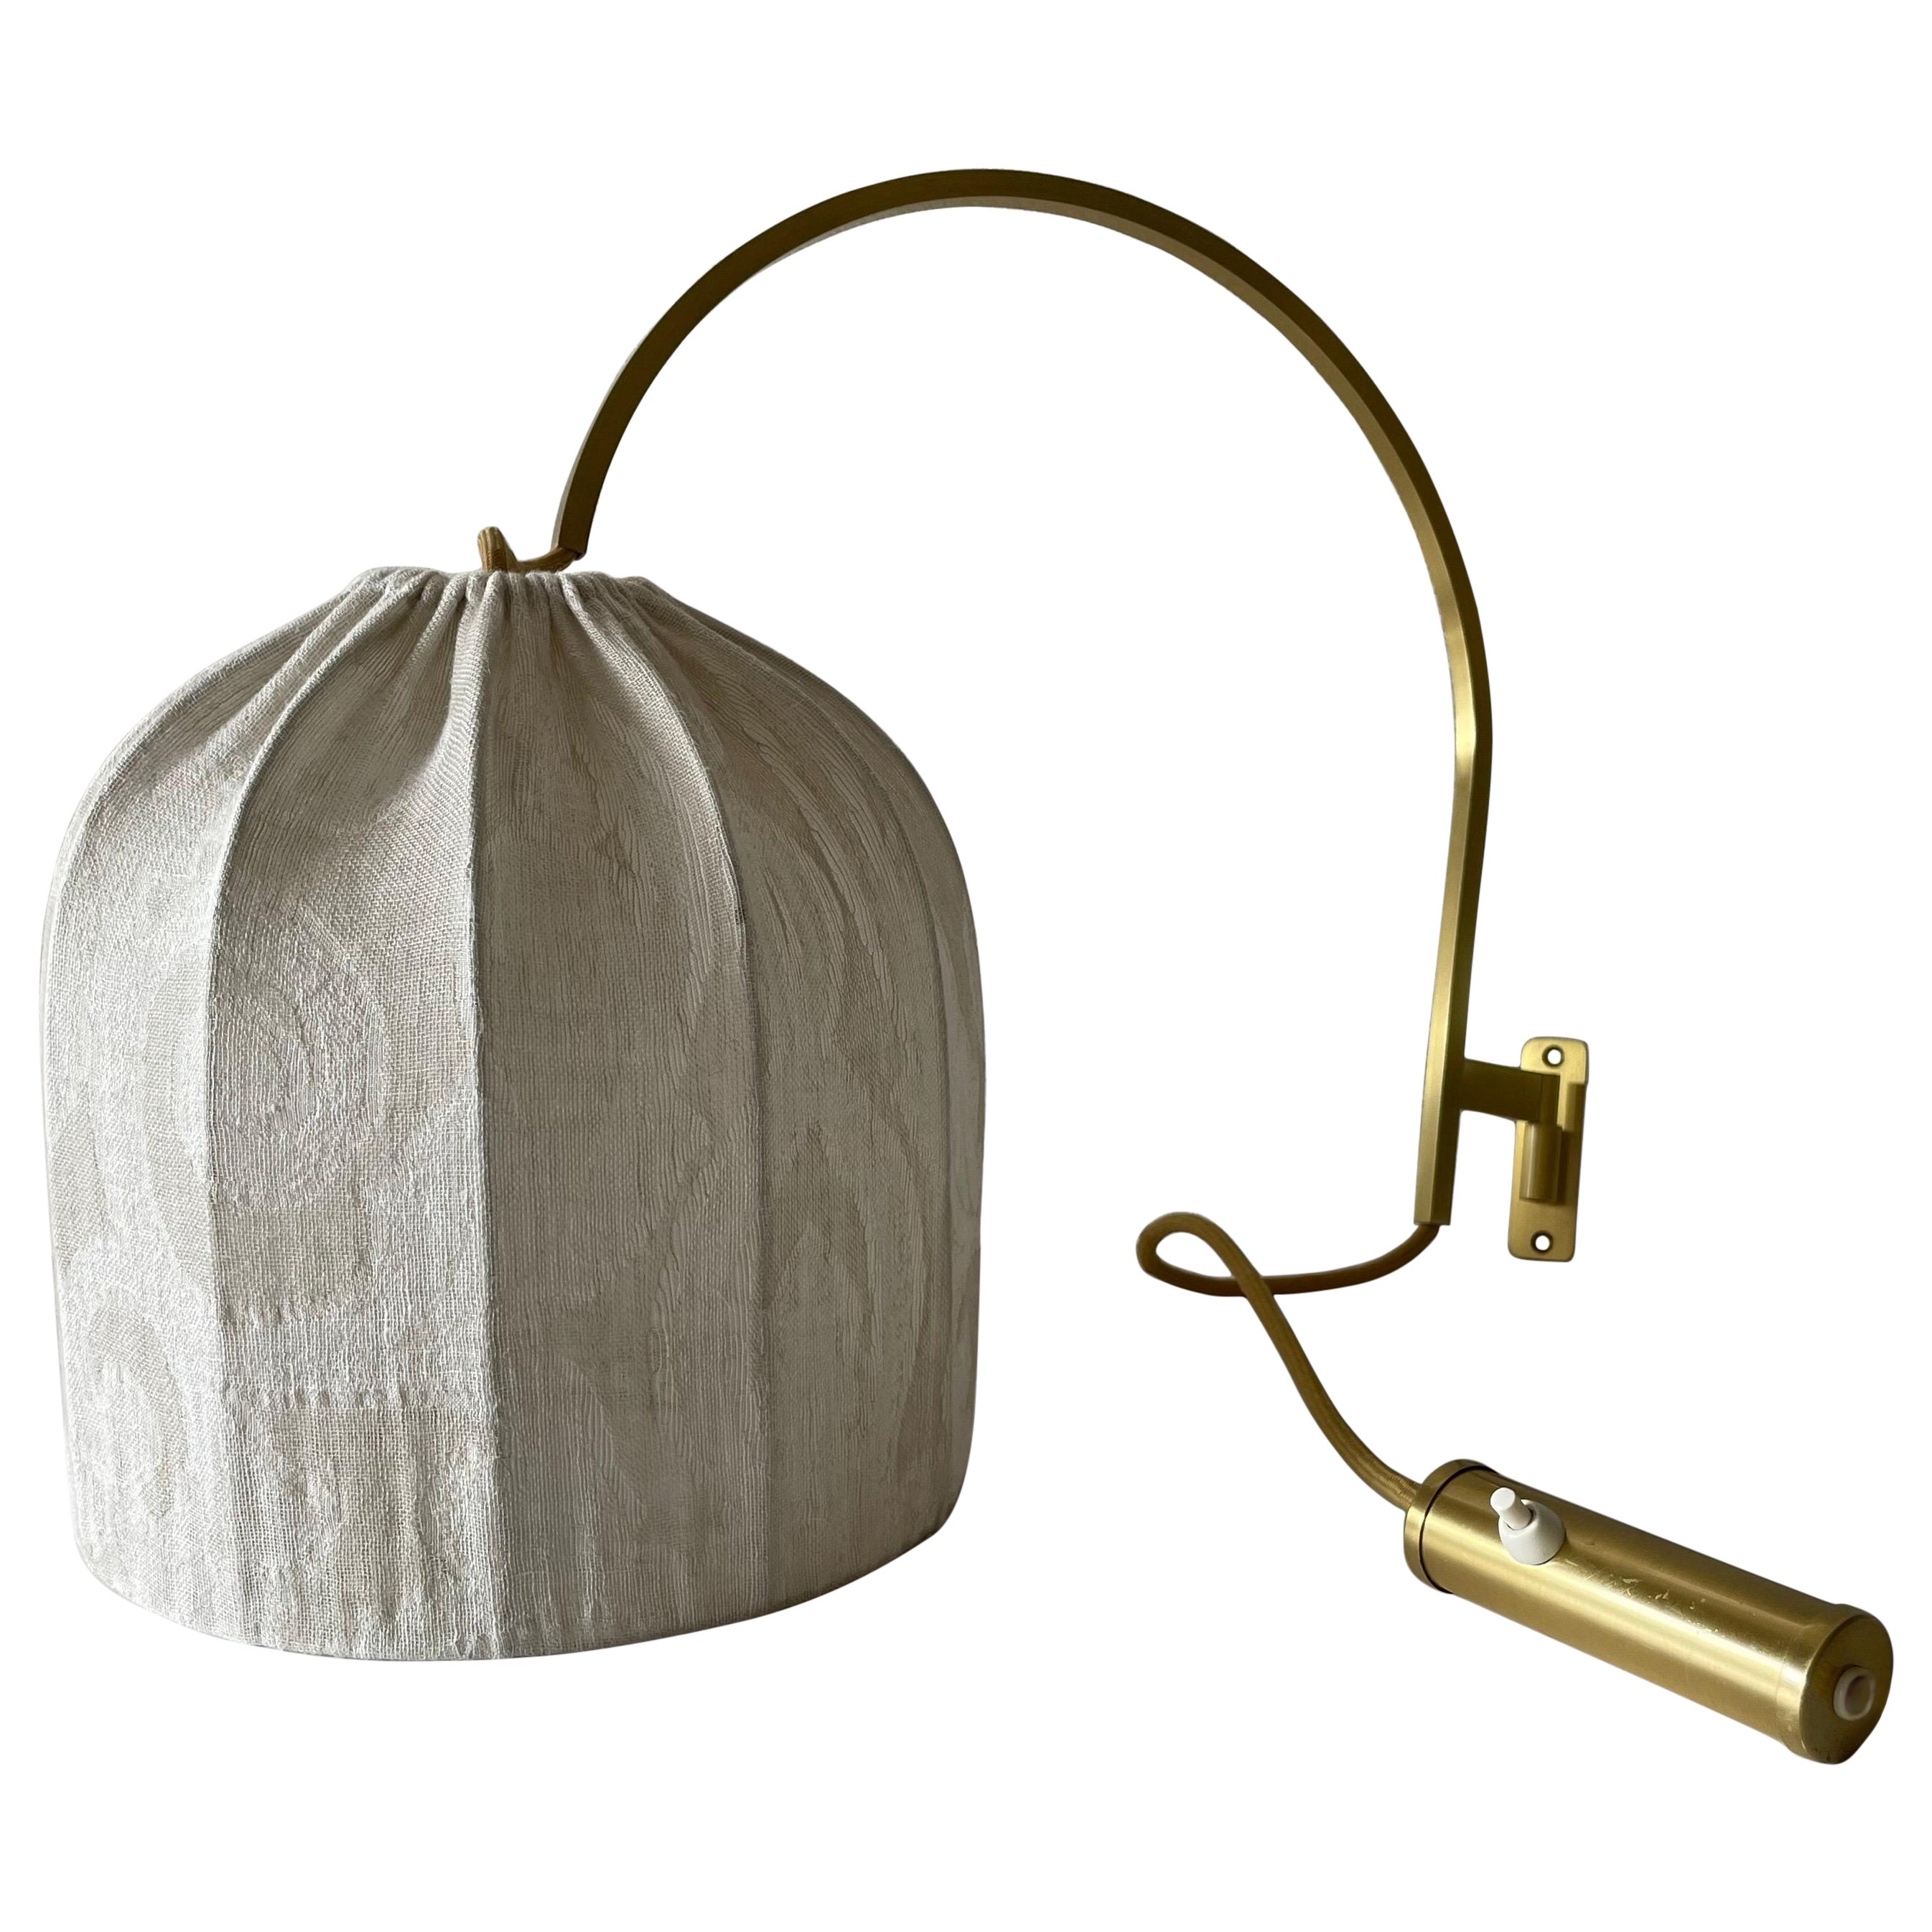 Arch Shaped Brass Body Fabric Shade Wall Lamp by WKR Leuchten, 1970s, Germany For Sale